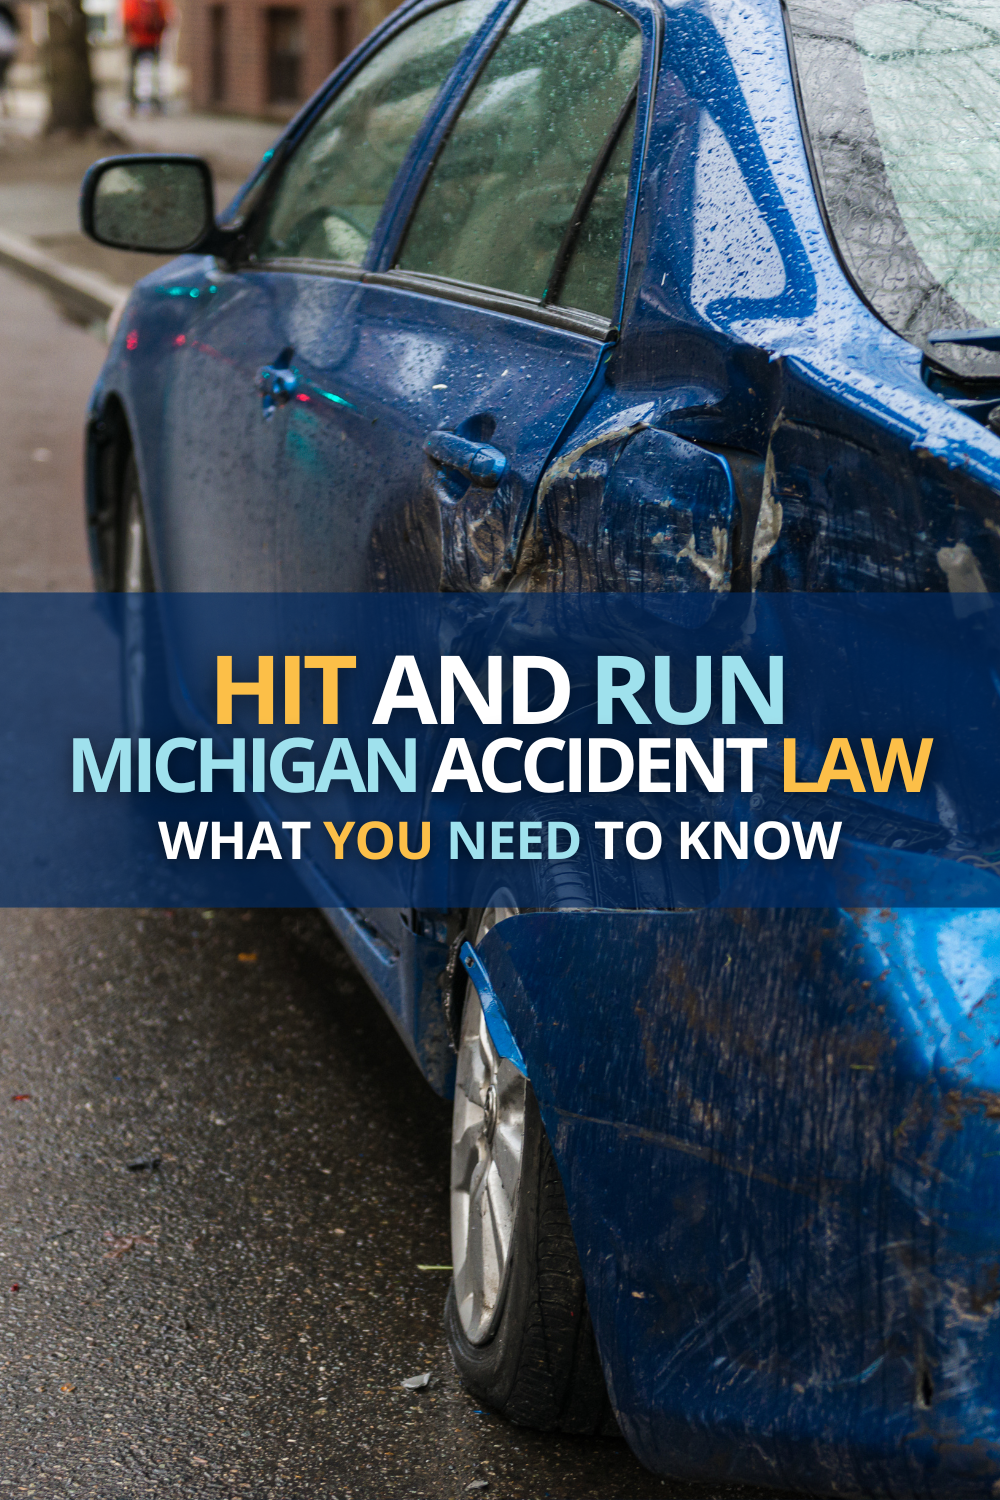 Michigan Hit And Run Accident Law: What You Need To Know